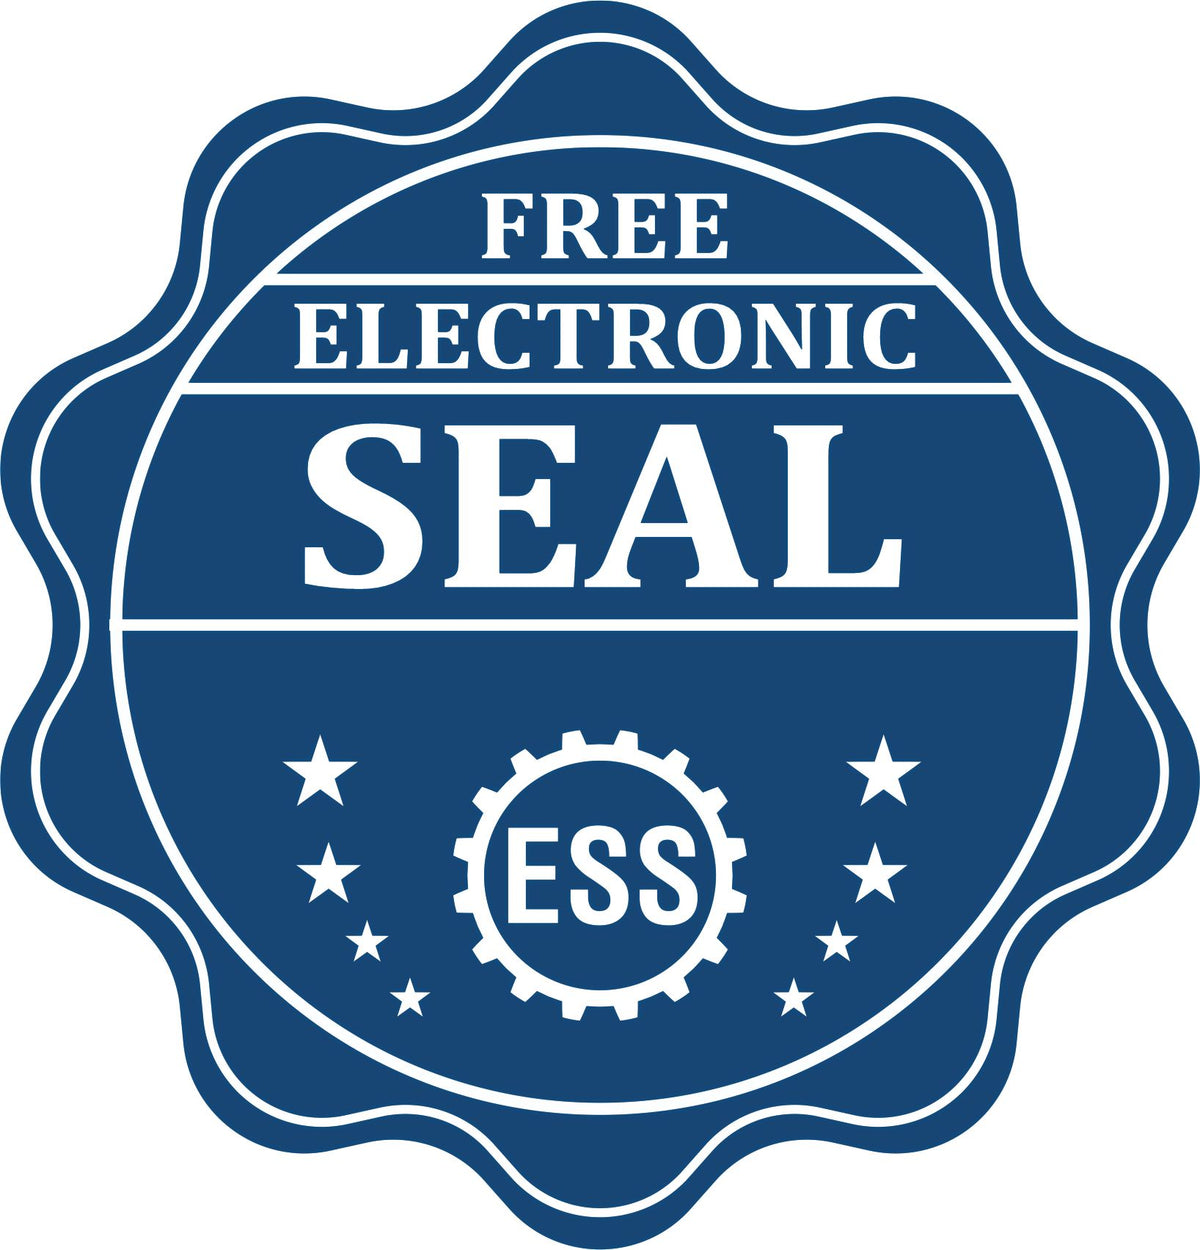 A badge showing a free electronic seal for the Hybrid Oklahoma Engineer Seal with stars and the ESS gear on the emblem.